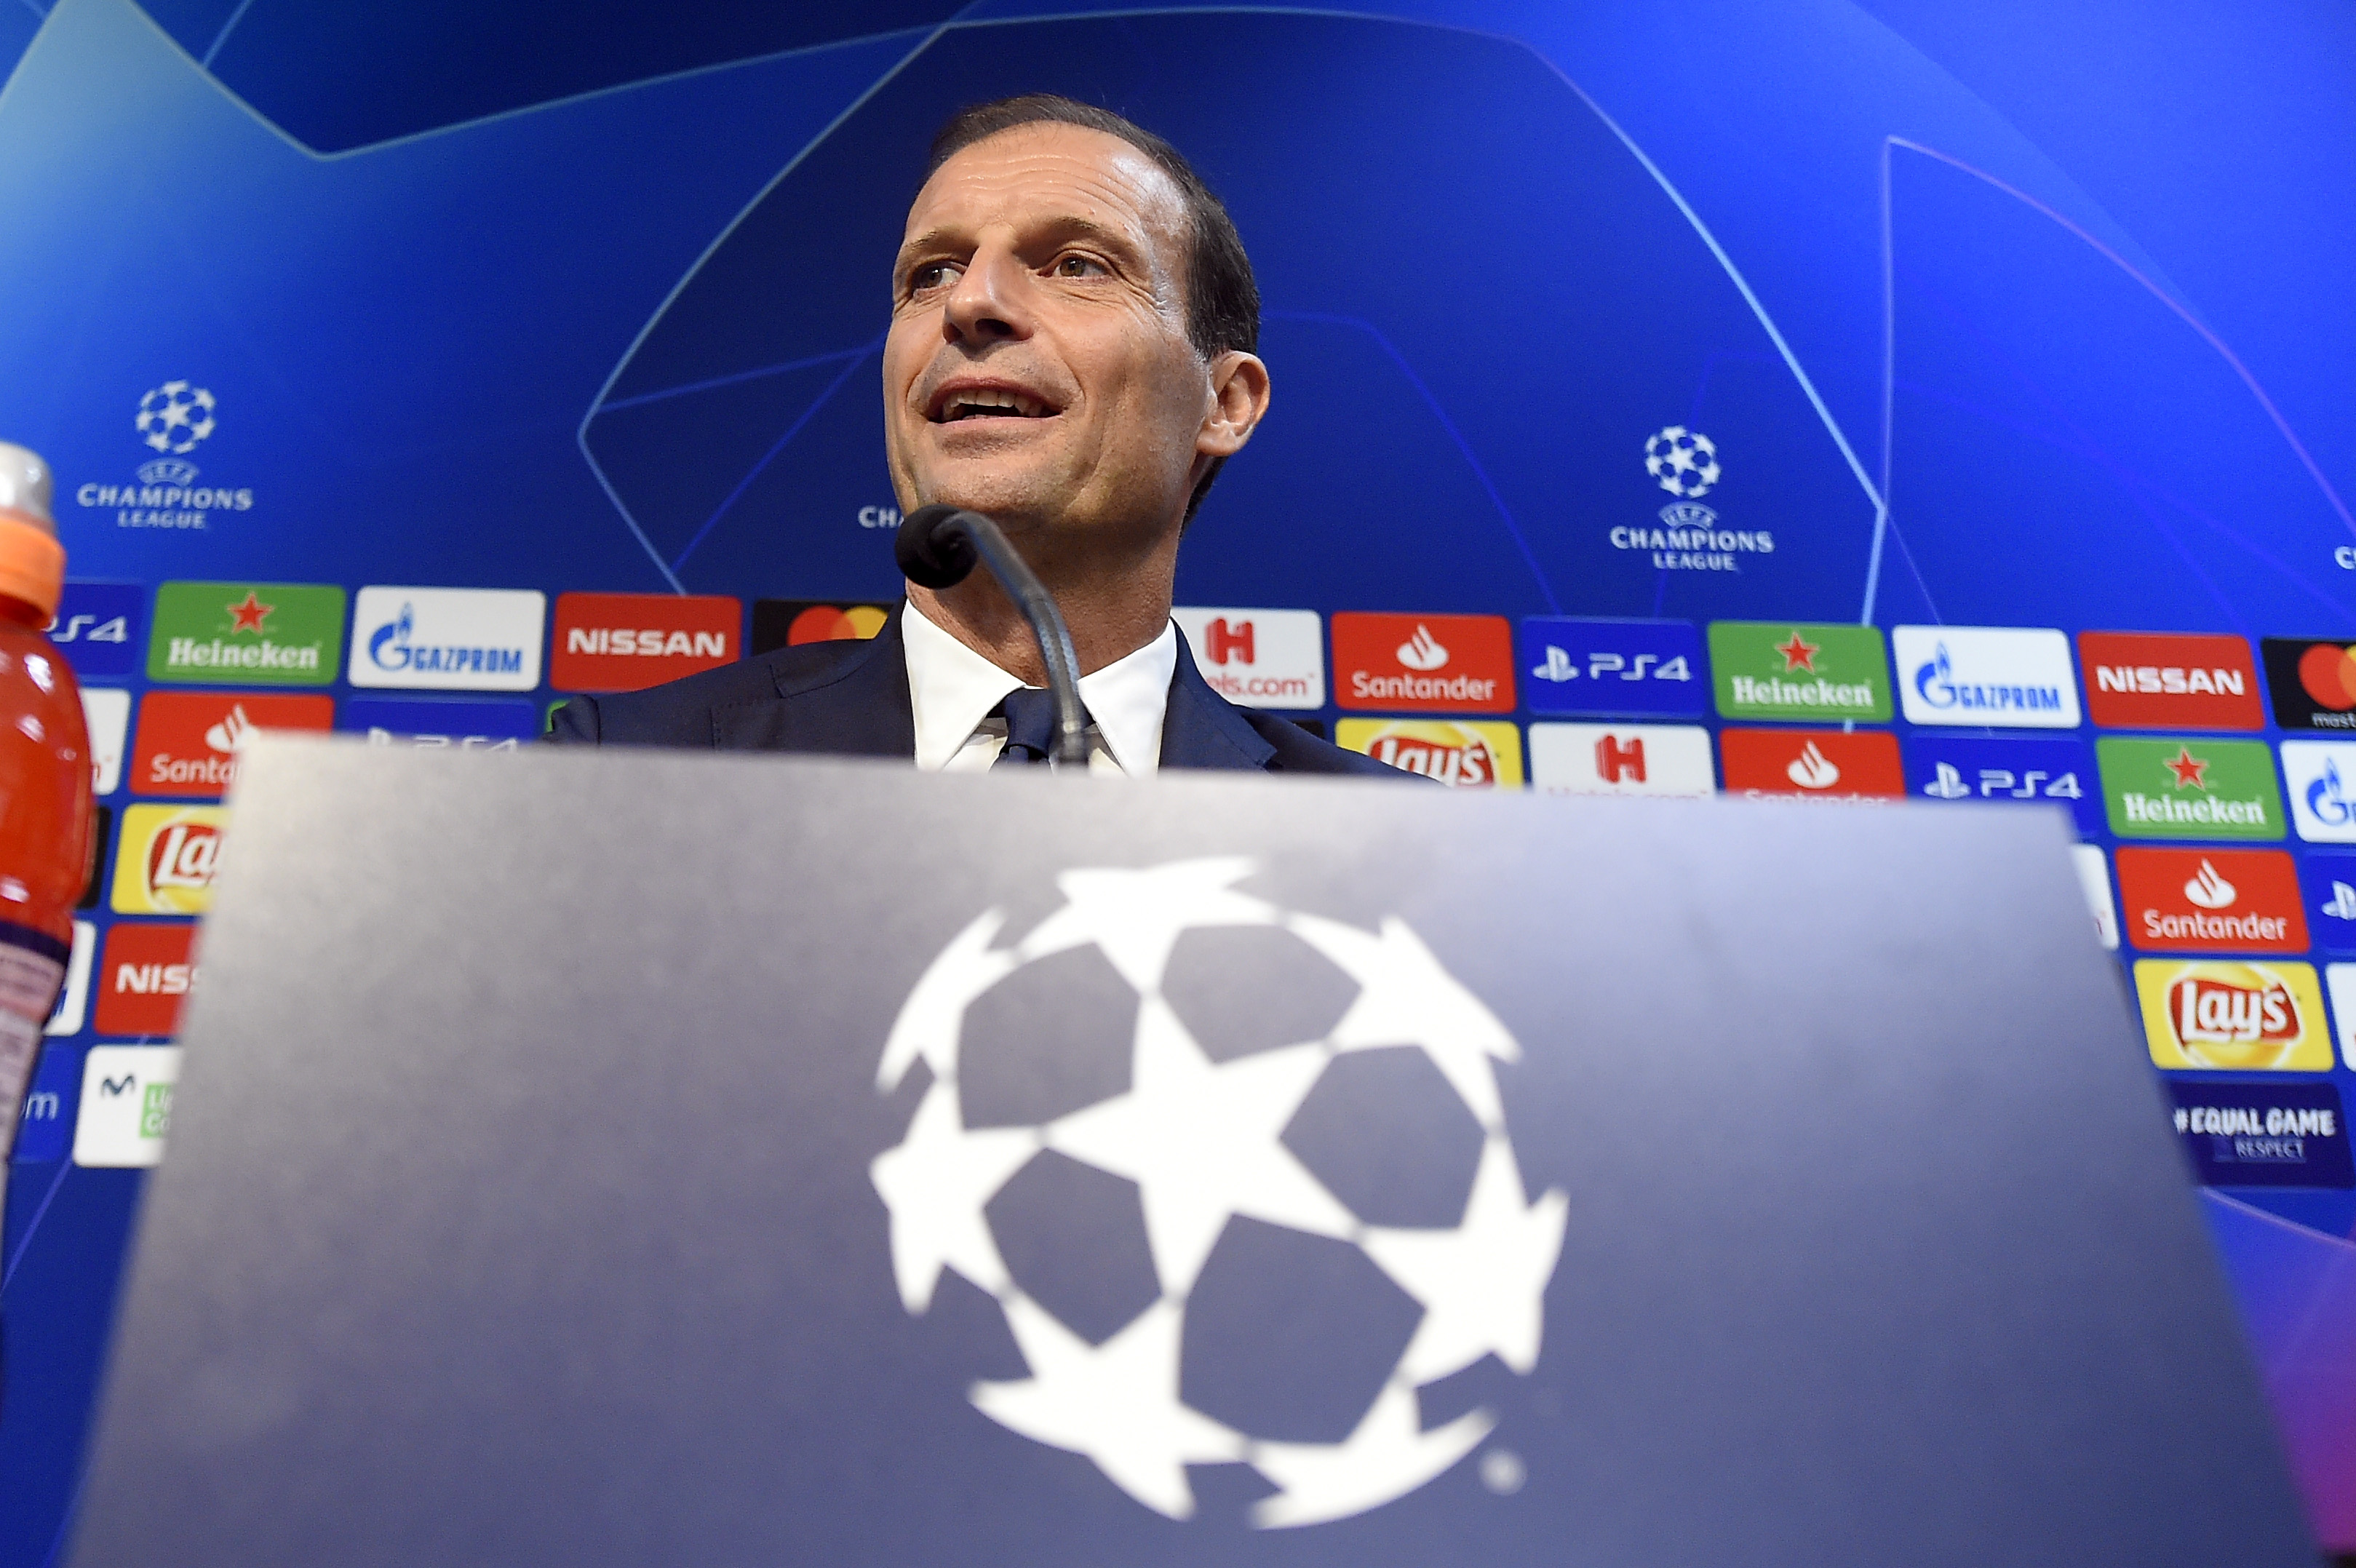 Juventus' Italian coach Massimiliano Allegri holds a press conference at the Mestalla stadium in Valencia on September 18, 2018 on the eve of the UEFA Champions League football match between Valencia CF and Juventus. (Photo by JOSE JORDAN / AFP)        (Photo credit should read JOSE JORDAN/AFP/Getty Images)